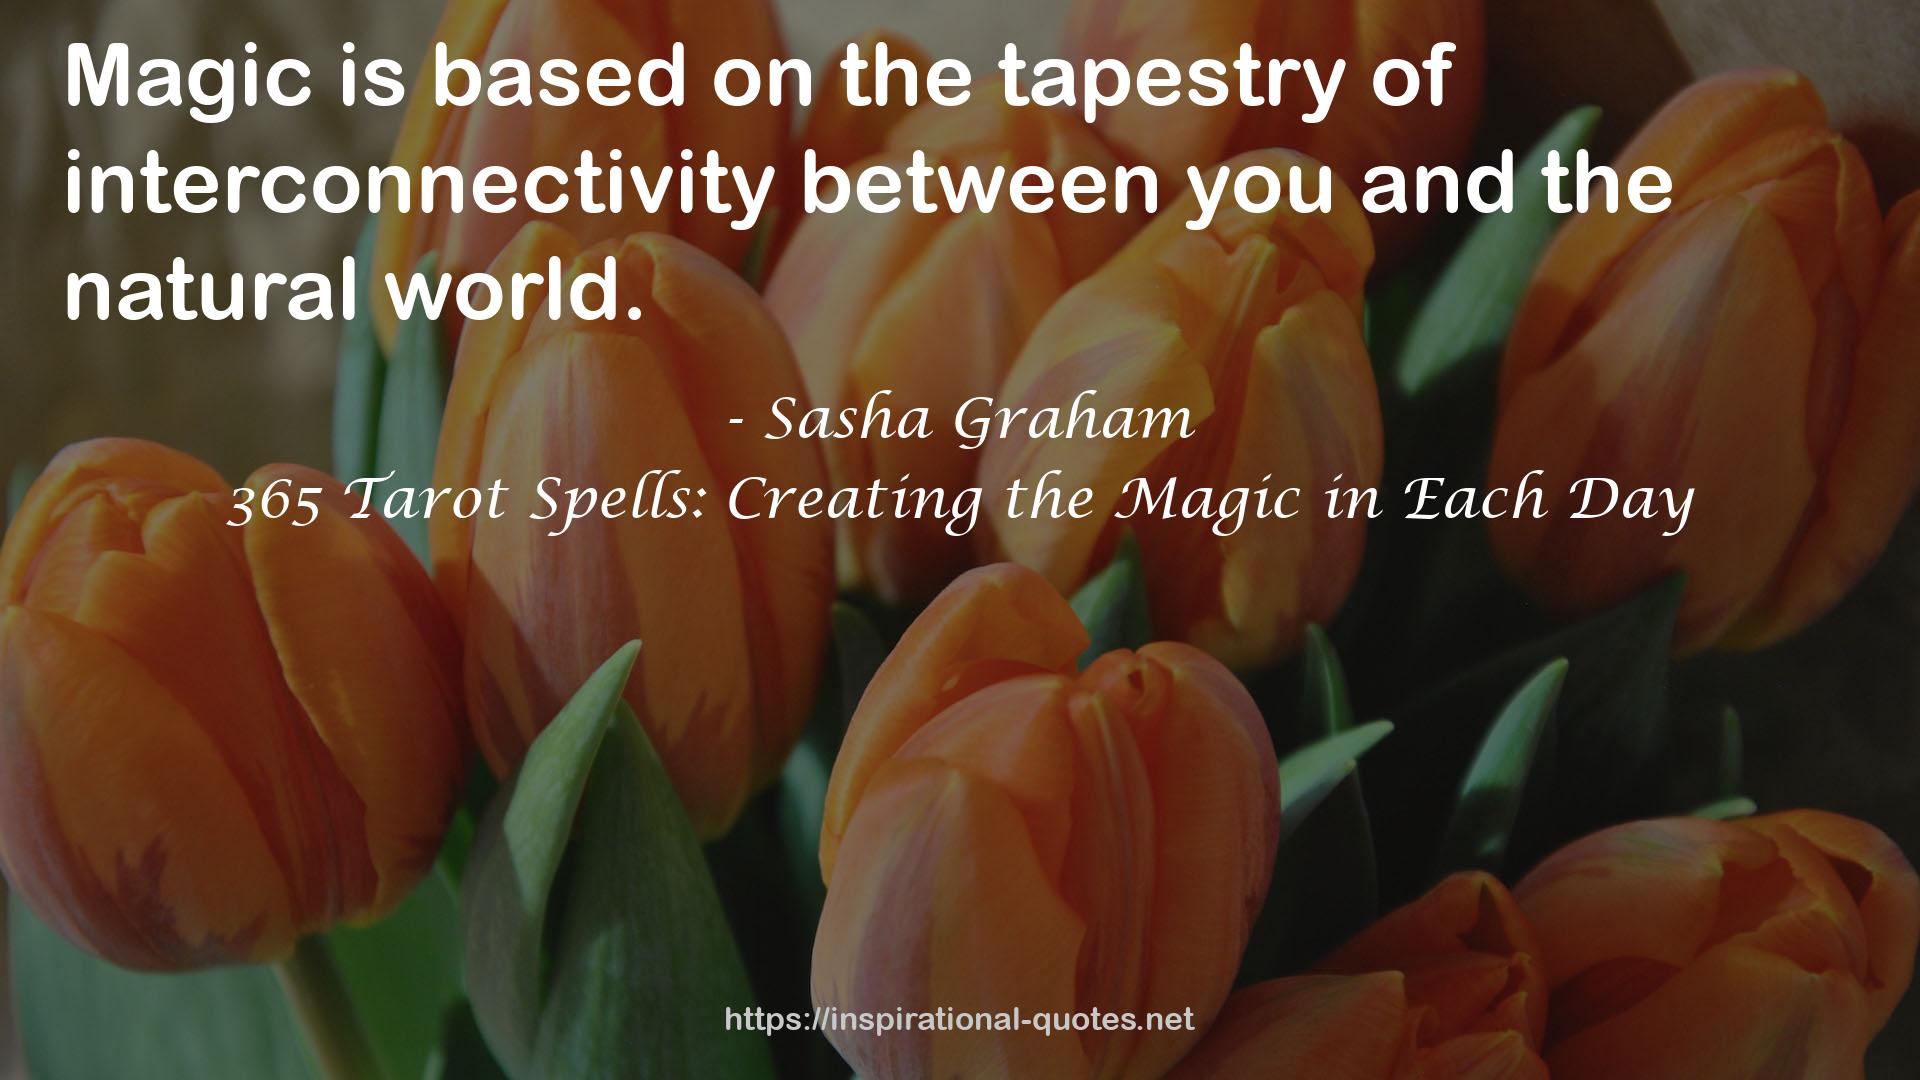 365 Tarot Spells: Creating the Magic in Each Day QUOTES